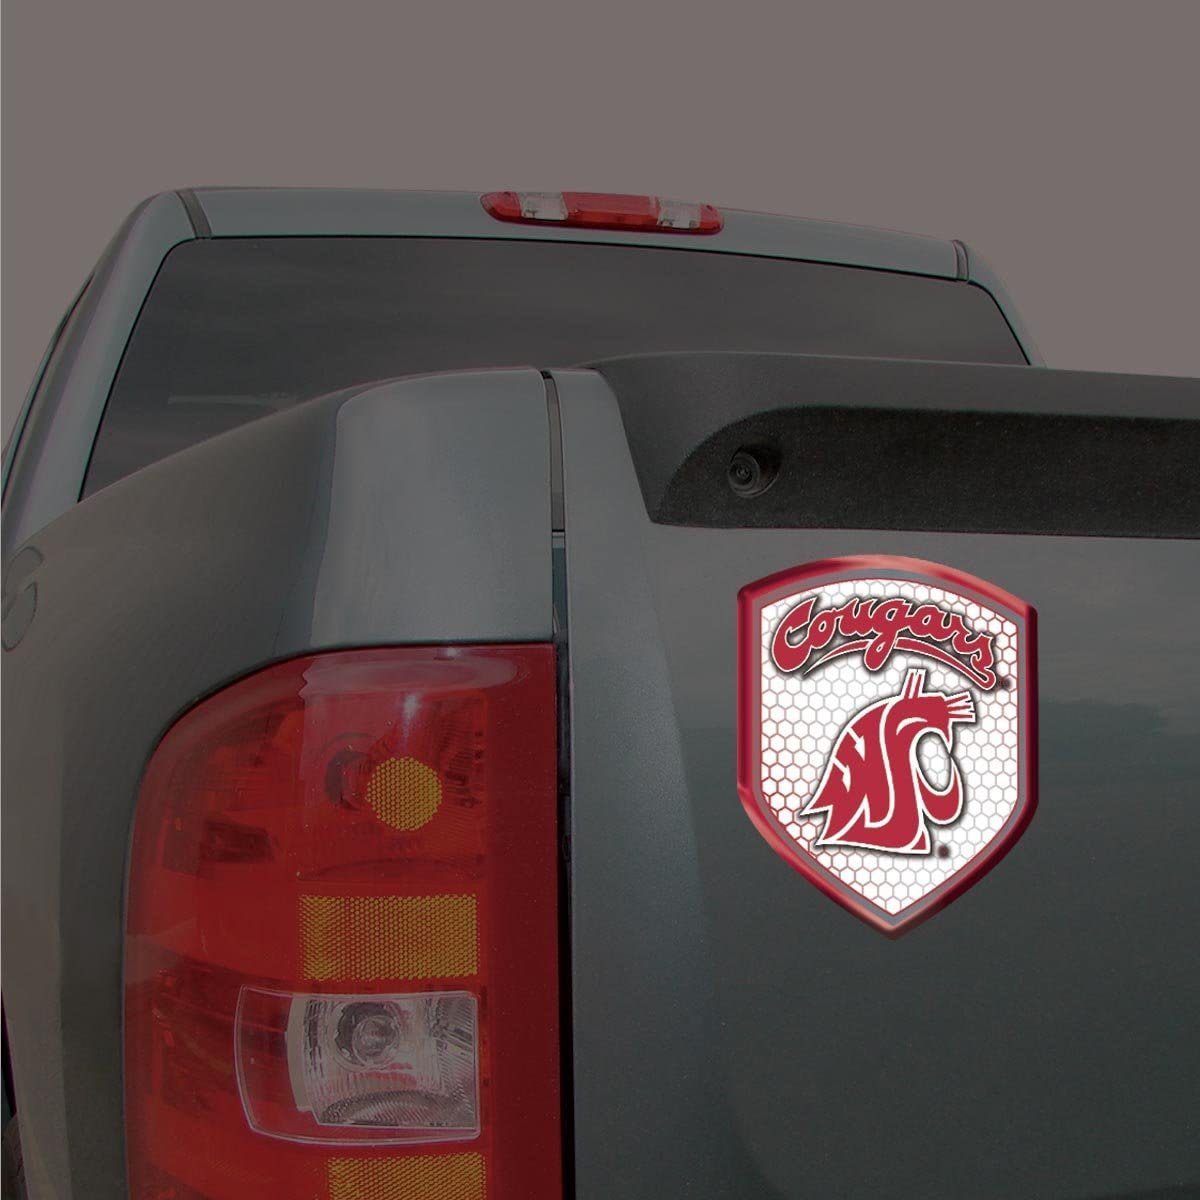 Washington State University Cougars High Intensity Reflector, Shield Shape, Raised Decal Sticker, 2.5x3.5 Inch, Home or Auto, Full Adhesive Backing